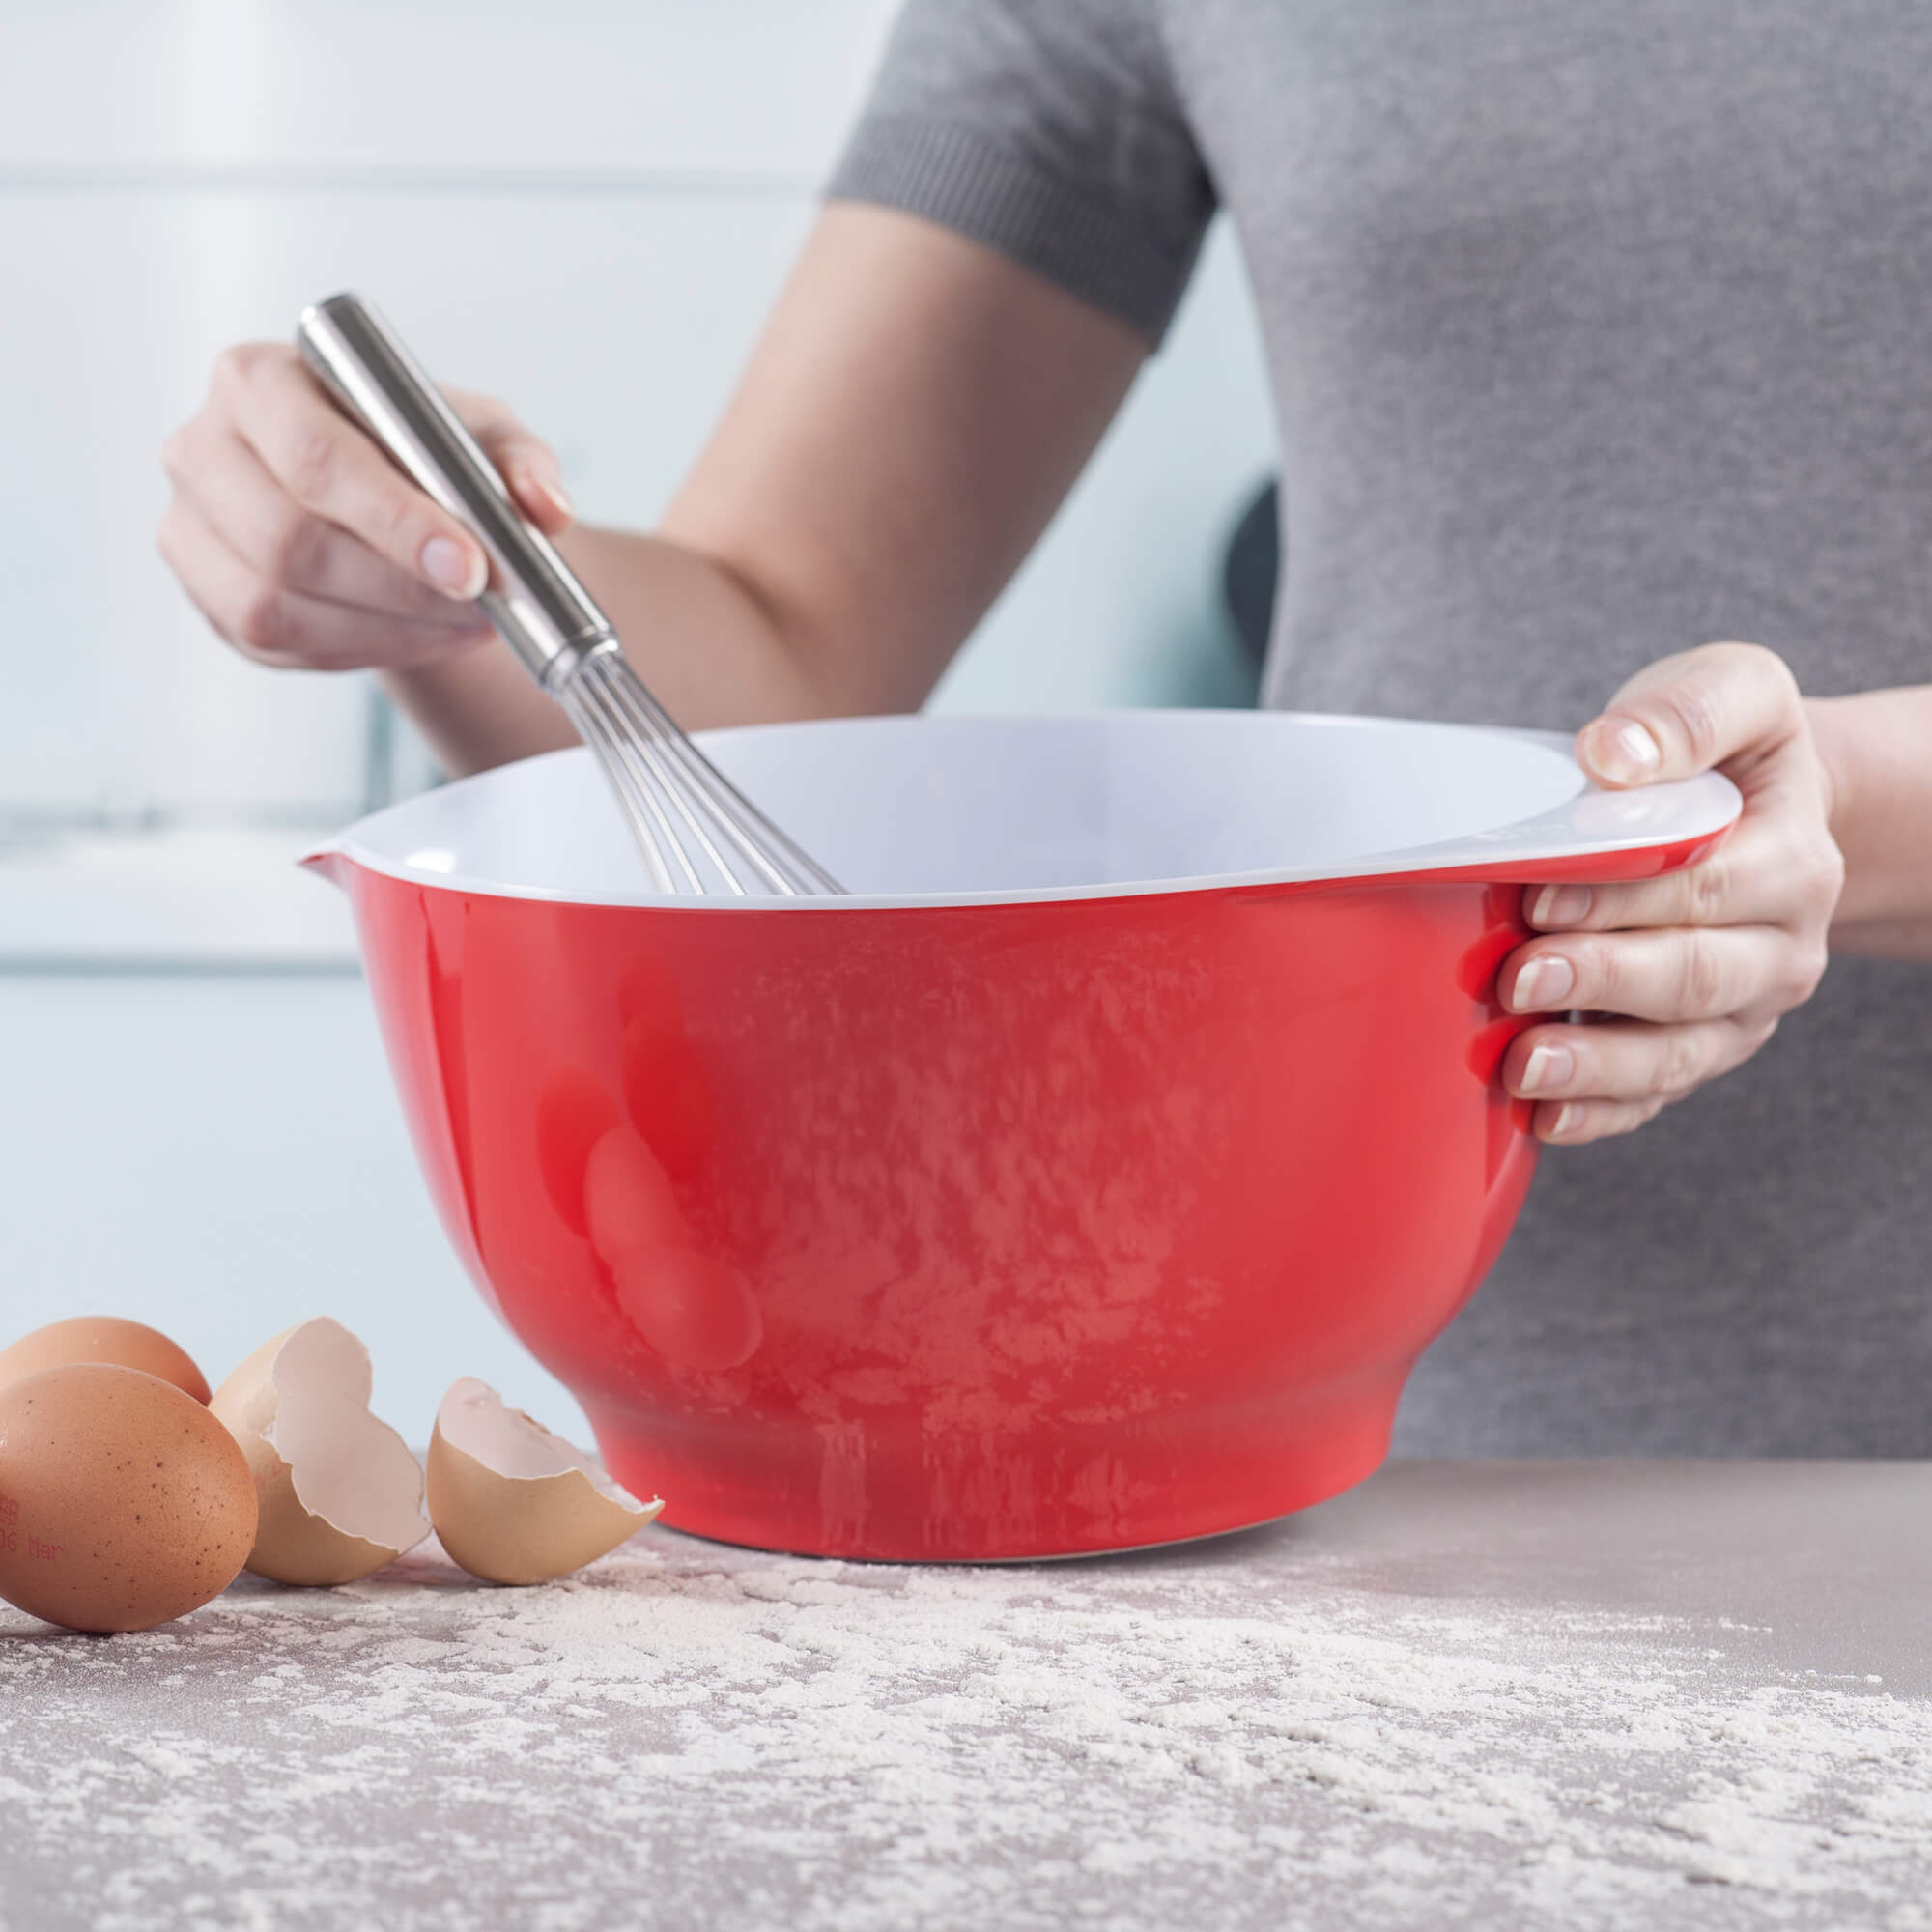 Baking using the Zeal Duo Tone Mixing Bowl in Red